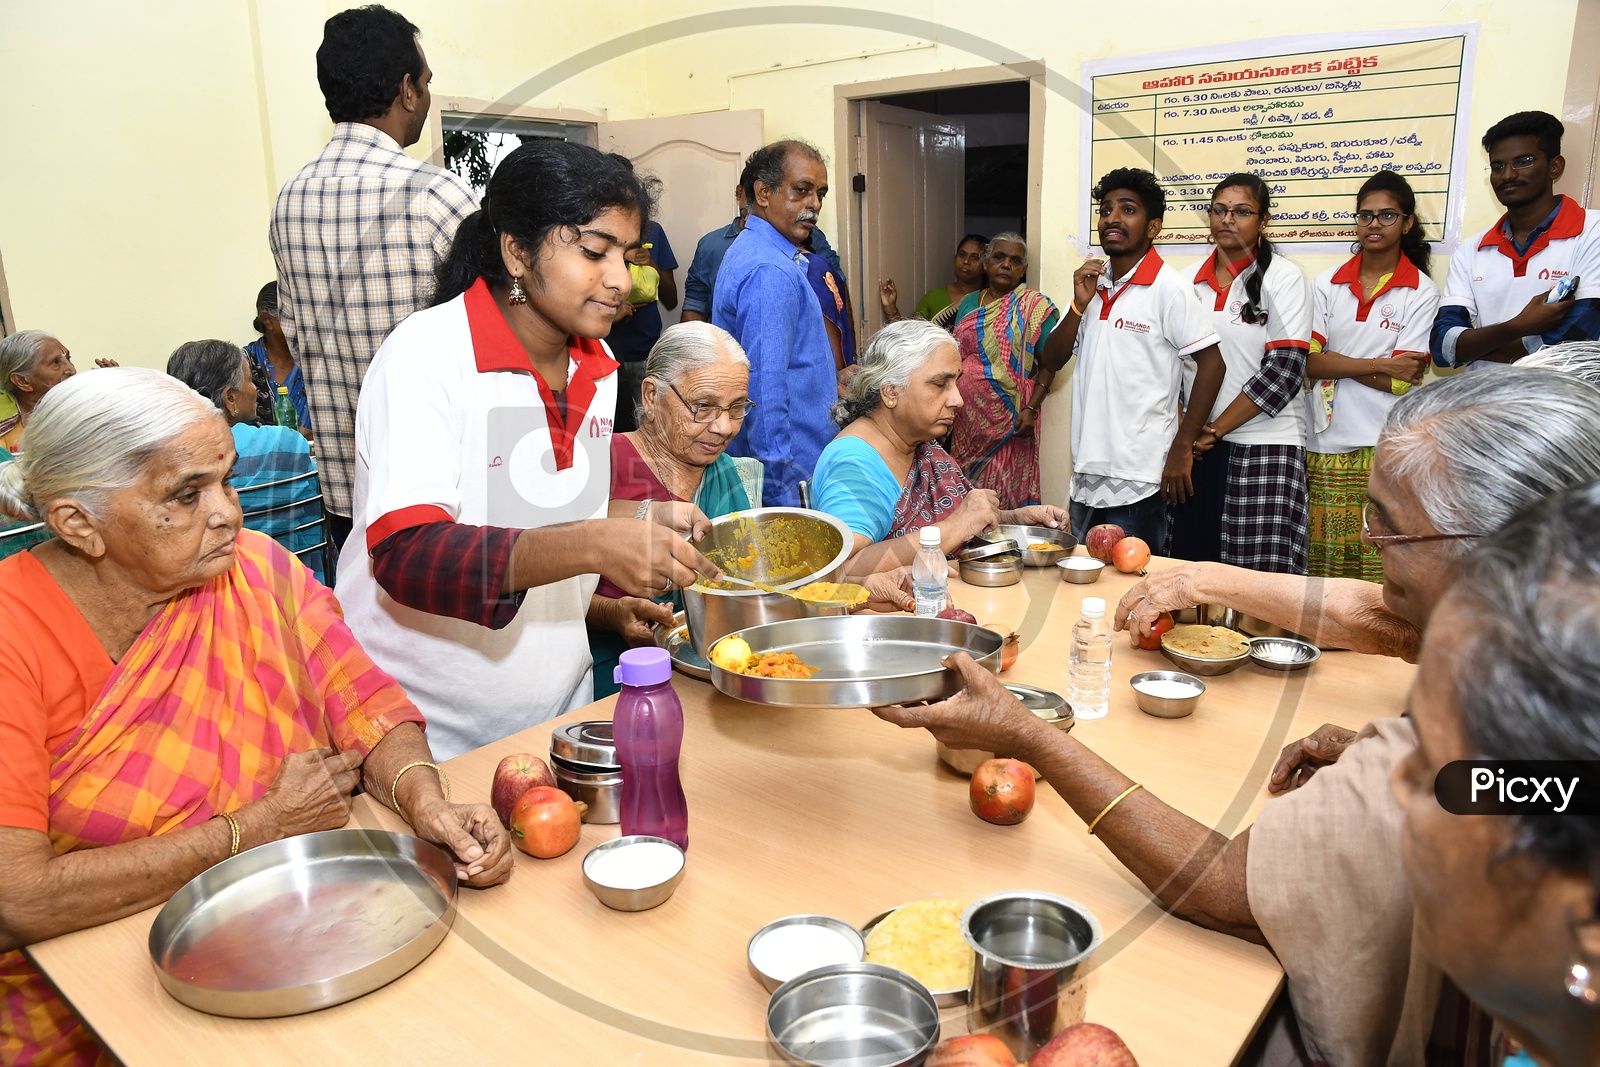 Image Of Indian Old Woman Dining In A Old Age Home Dining Hall Ub874112 Picxy